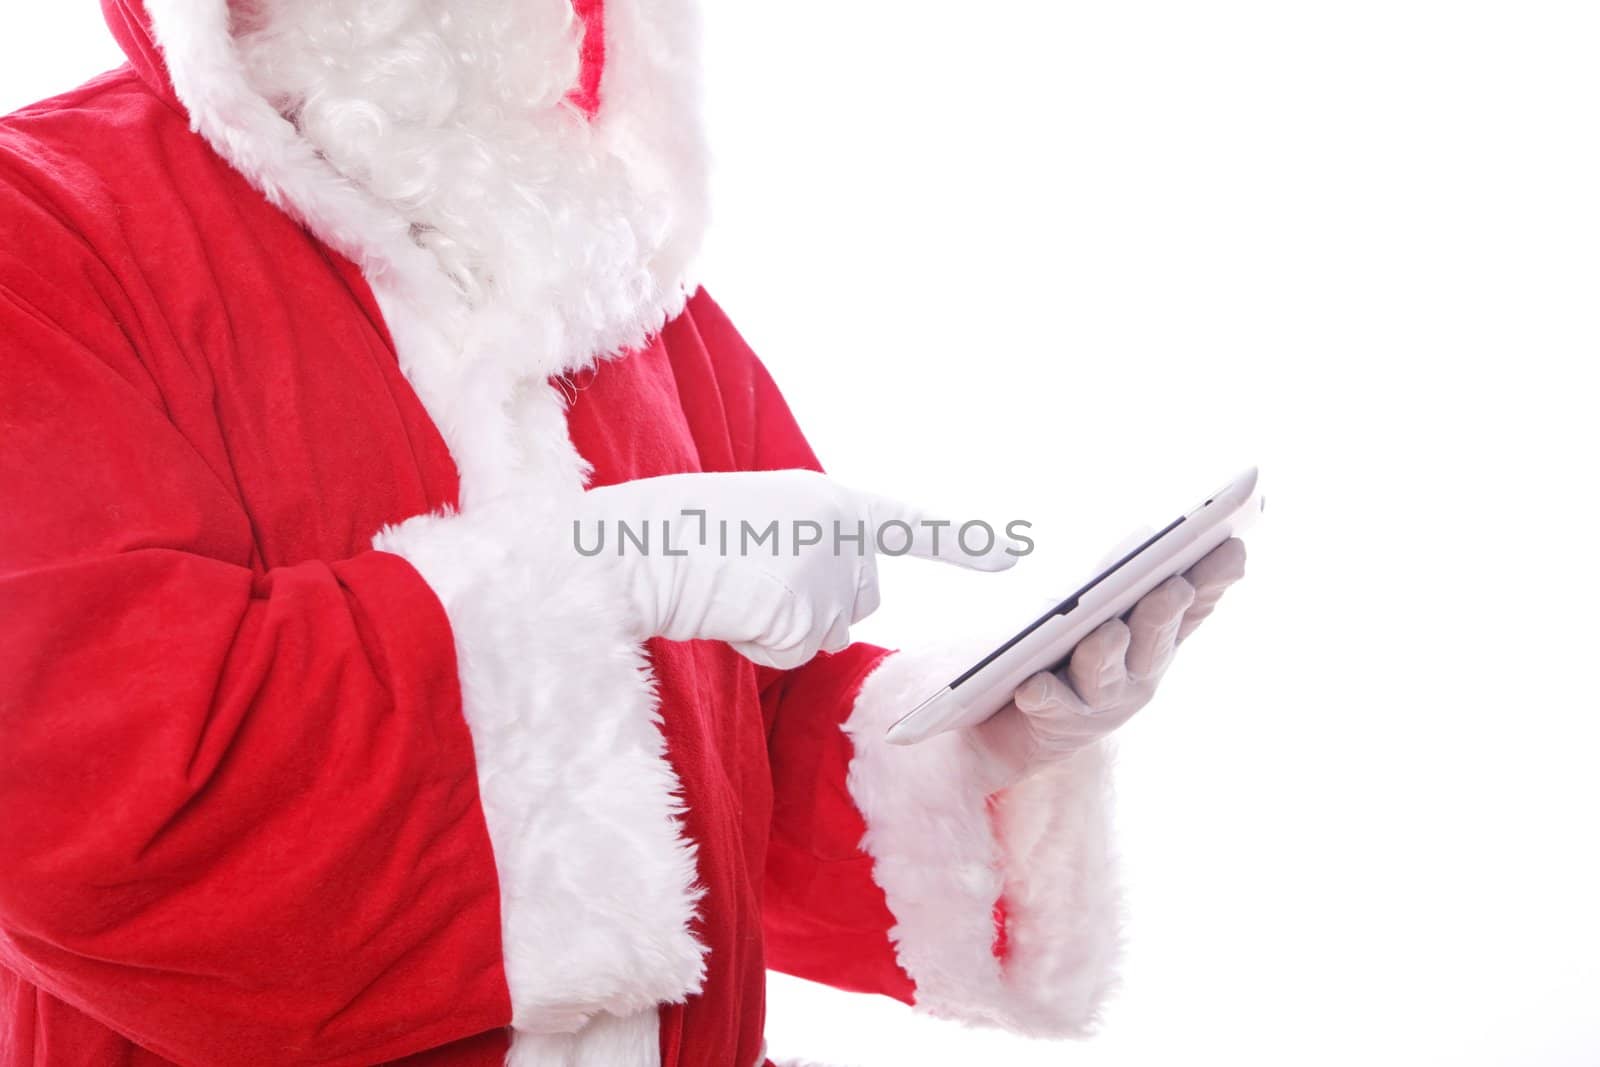 santa claus with digital tablet. isolated on the white background